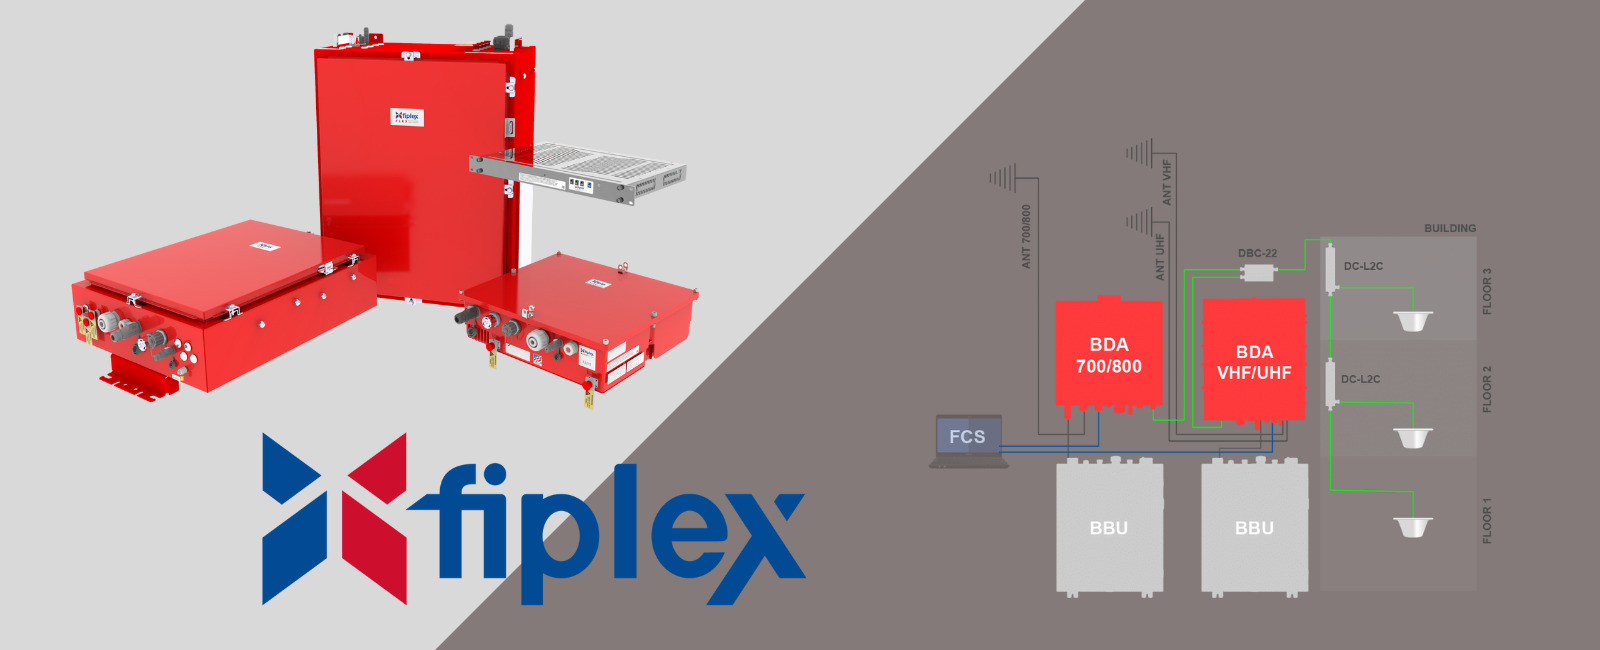 fiplex public safety communication products